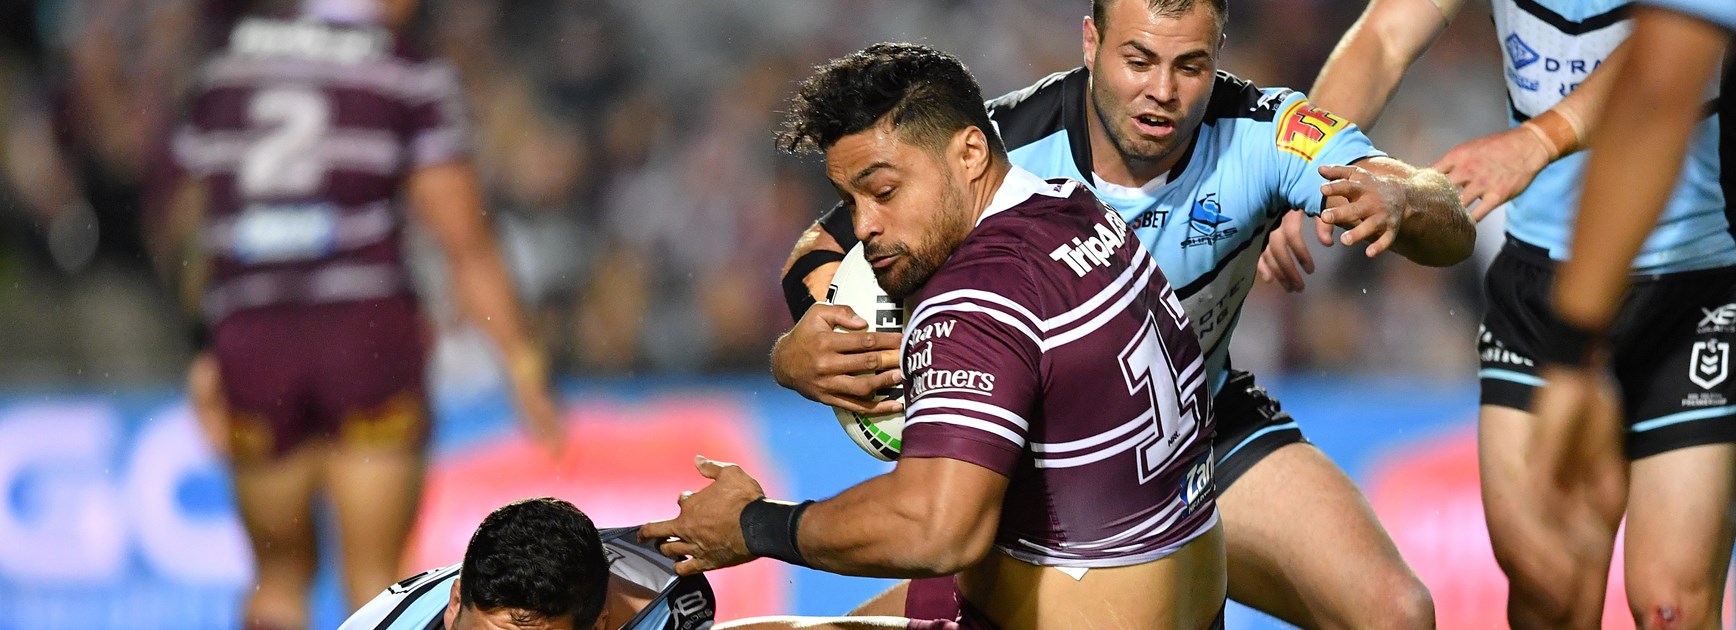 Green whistle to new deal: Manly prop's rare injury turnaround